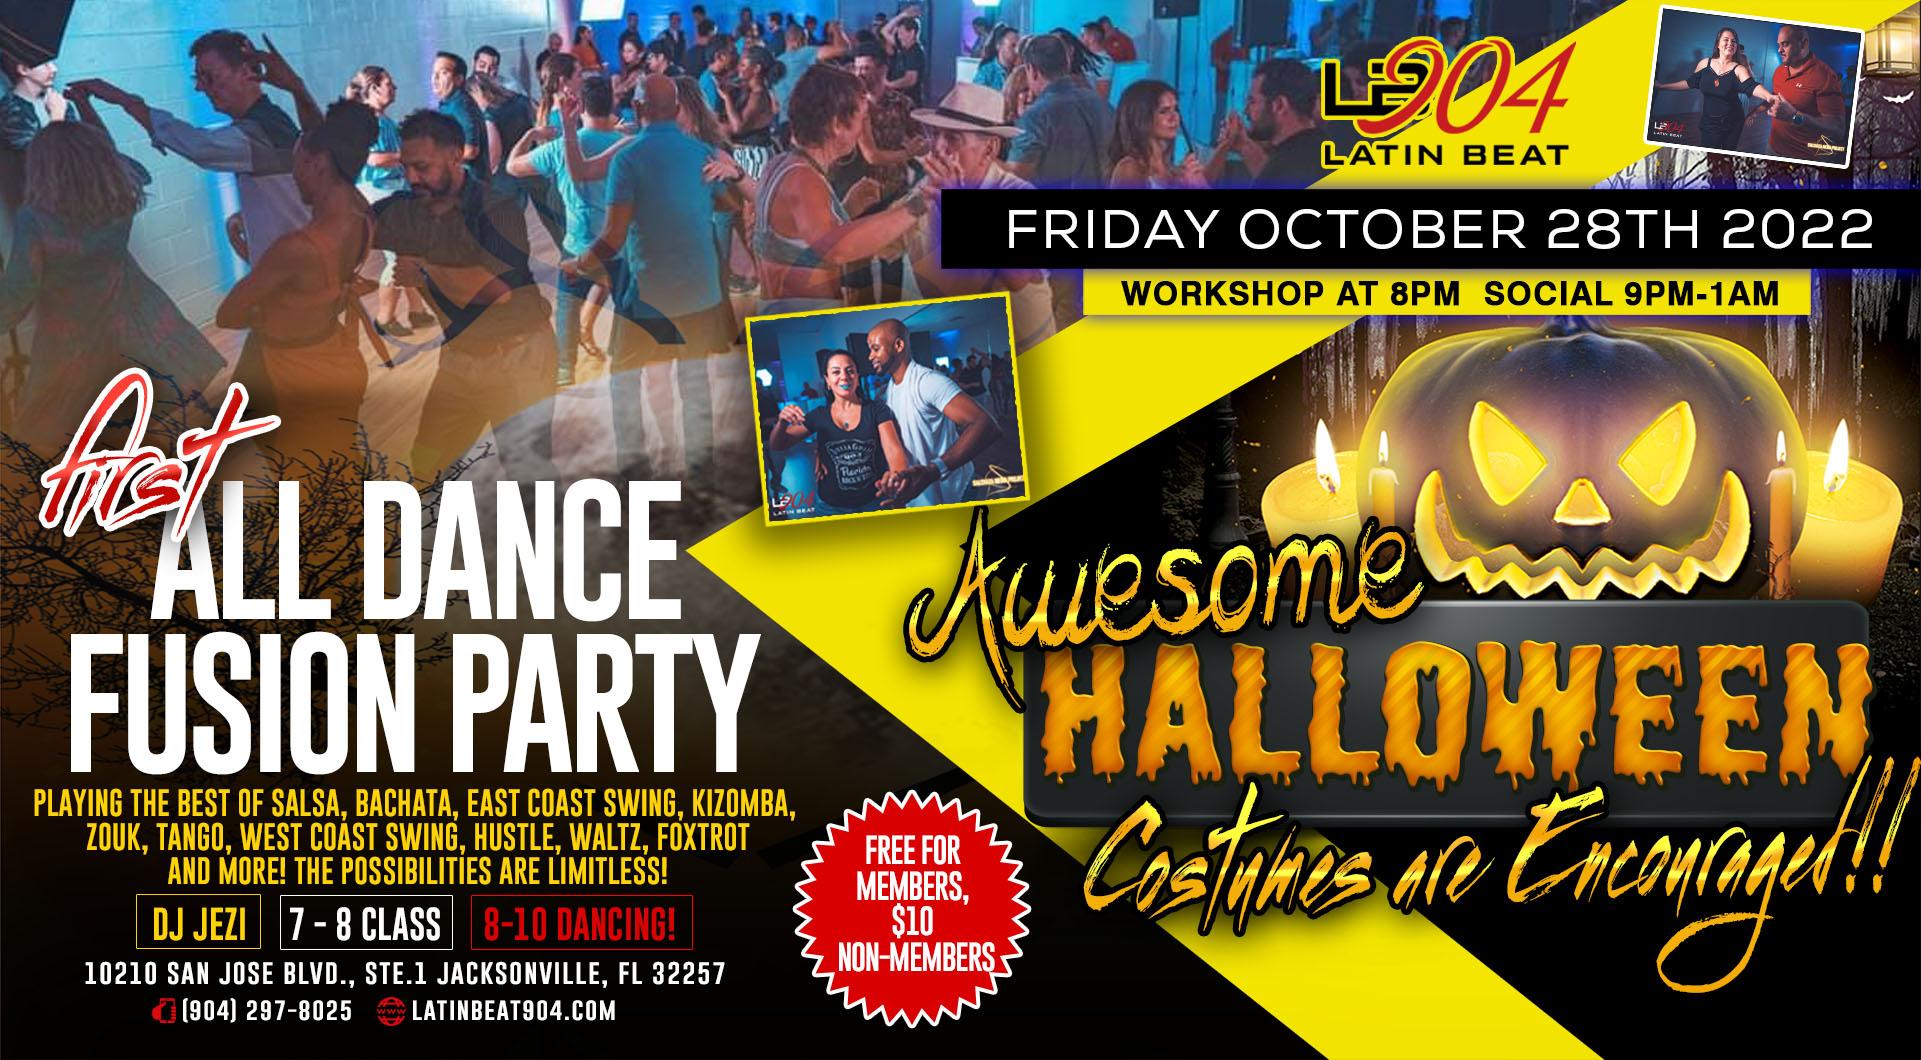 All Dance Fusion Halloween Party I Latin Beat 904
Fri Oct 28, 8:00 PM - Sat Oct 29, 1:00 AM
in 9 days